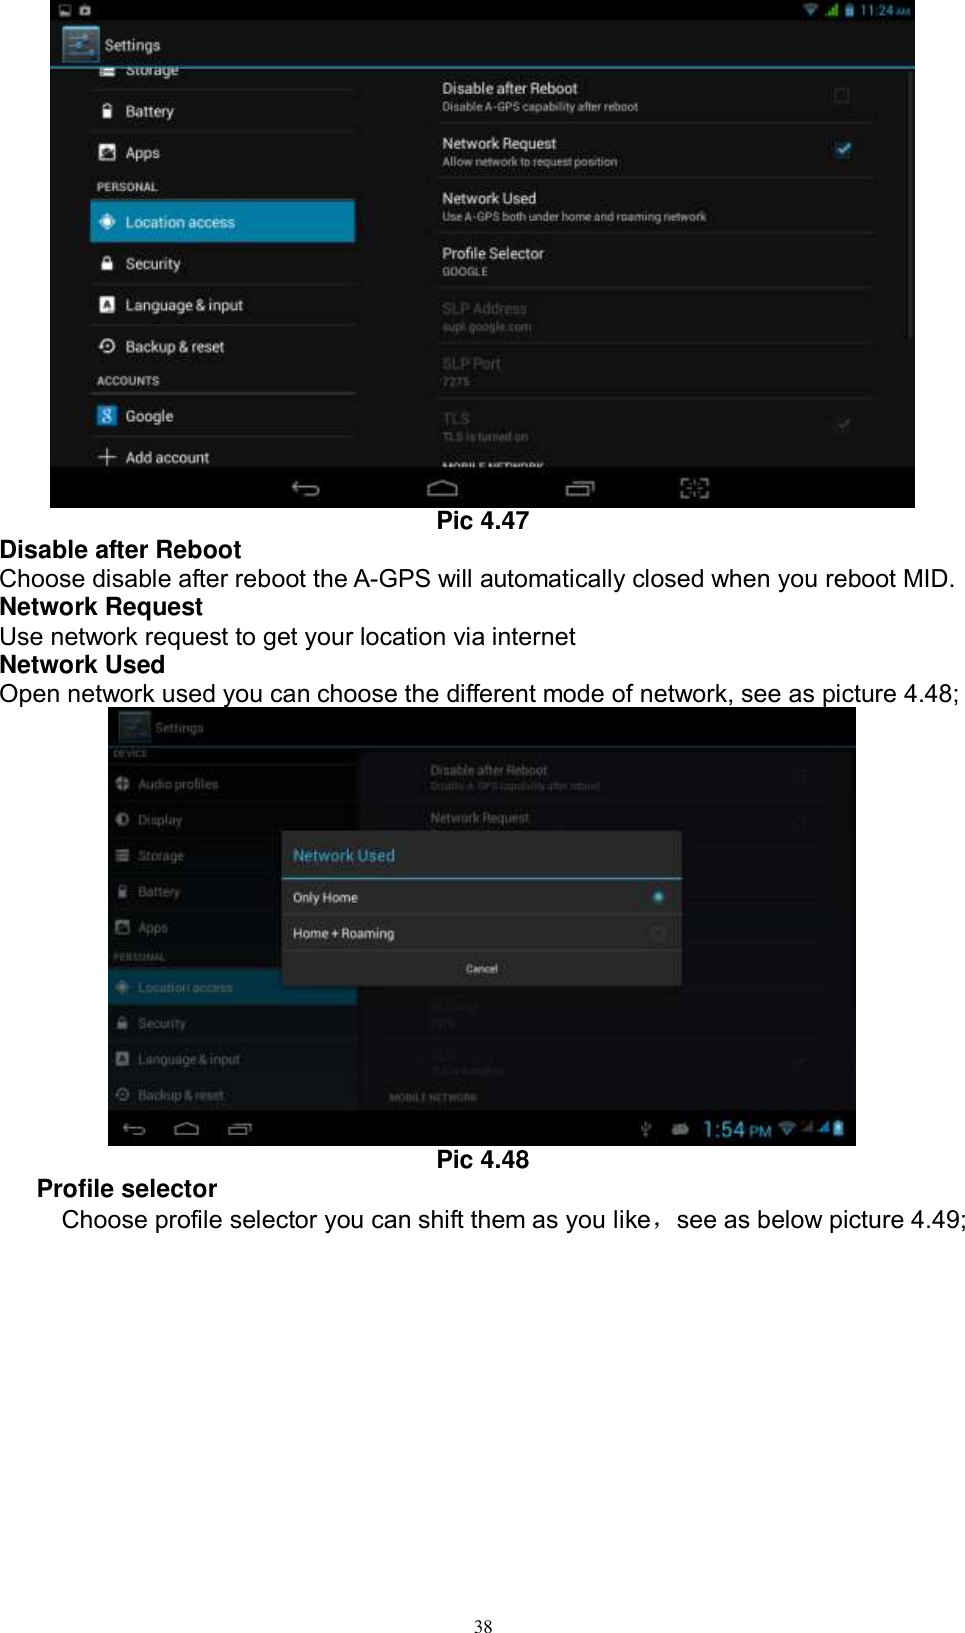      38  Pic 4.47 Disable after Reboot Choose disable after reboot the A-GPS will automatically closed when you reboot MID. Network Request Use network request to get your location via internet Network Used Open network used you can choose the different mode of network, see as picture 4.48;  Pic 4.48 Profile selector       Choose profile selector you can shift them as you like，see as below picture 4.49; 